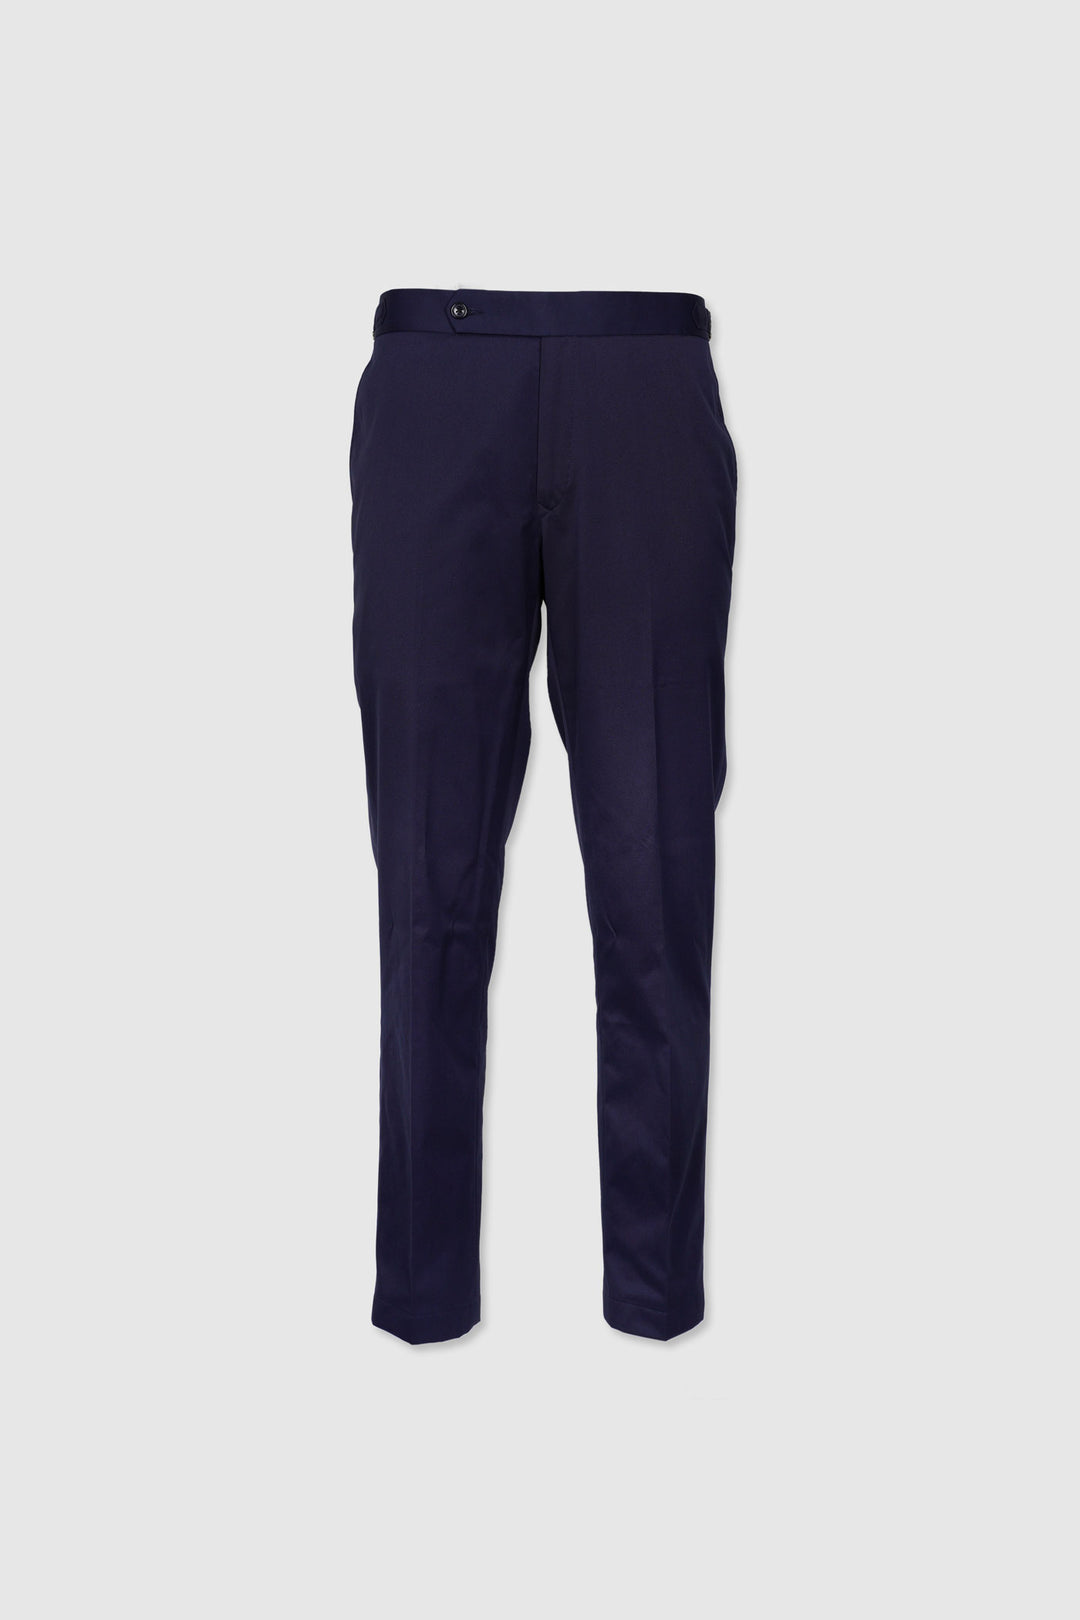 Navy Blue Cotton Tapered Fit Pants